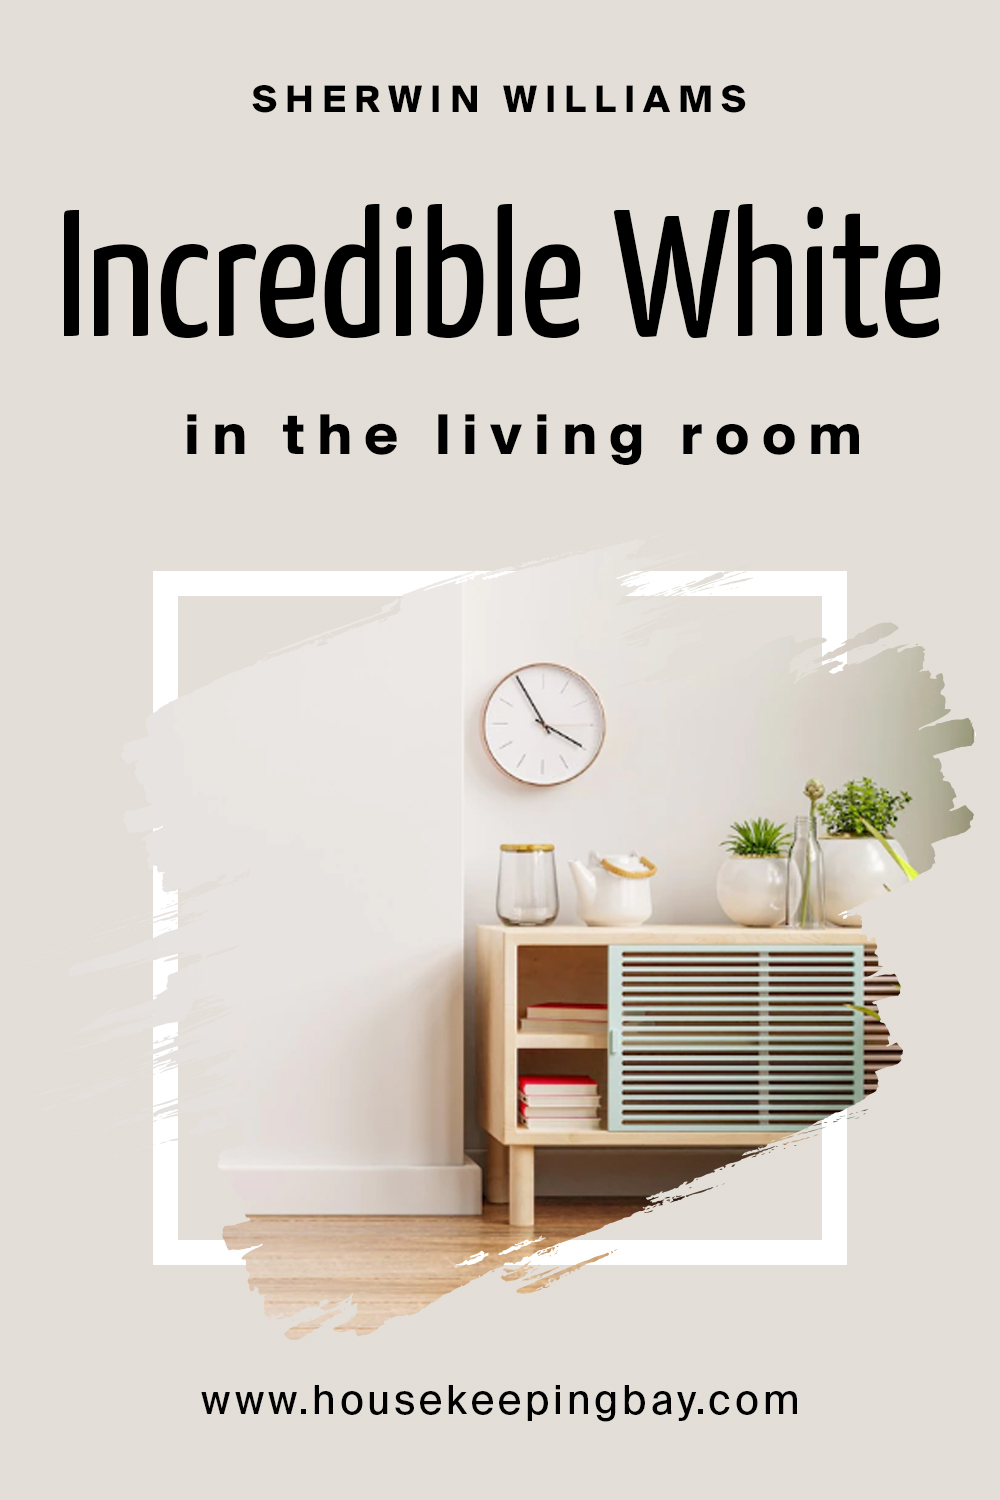 Sherwin Williams.Incredible White In the Living Room